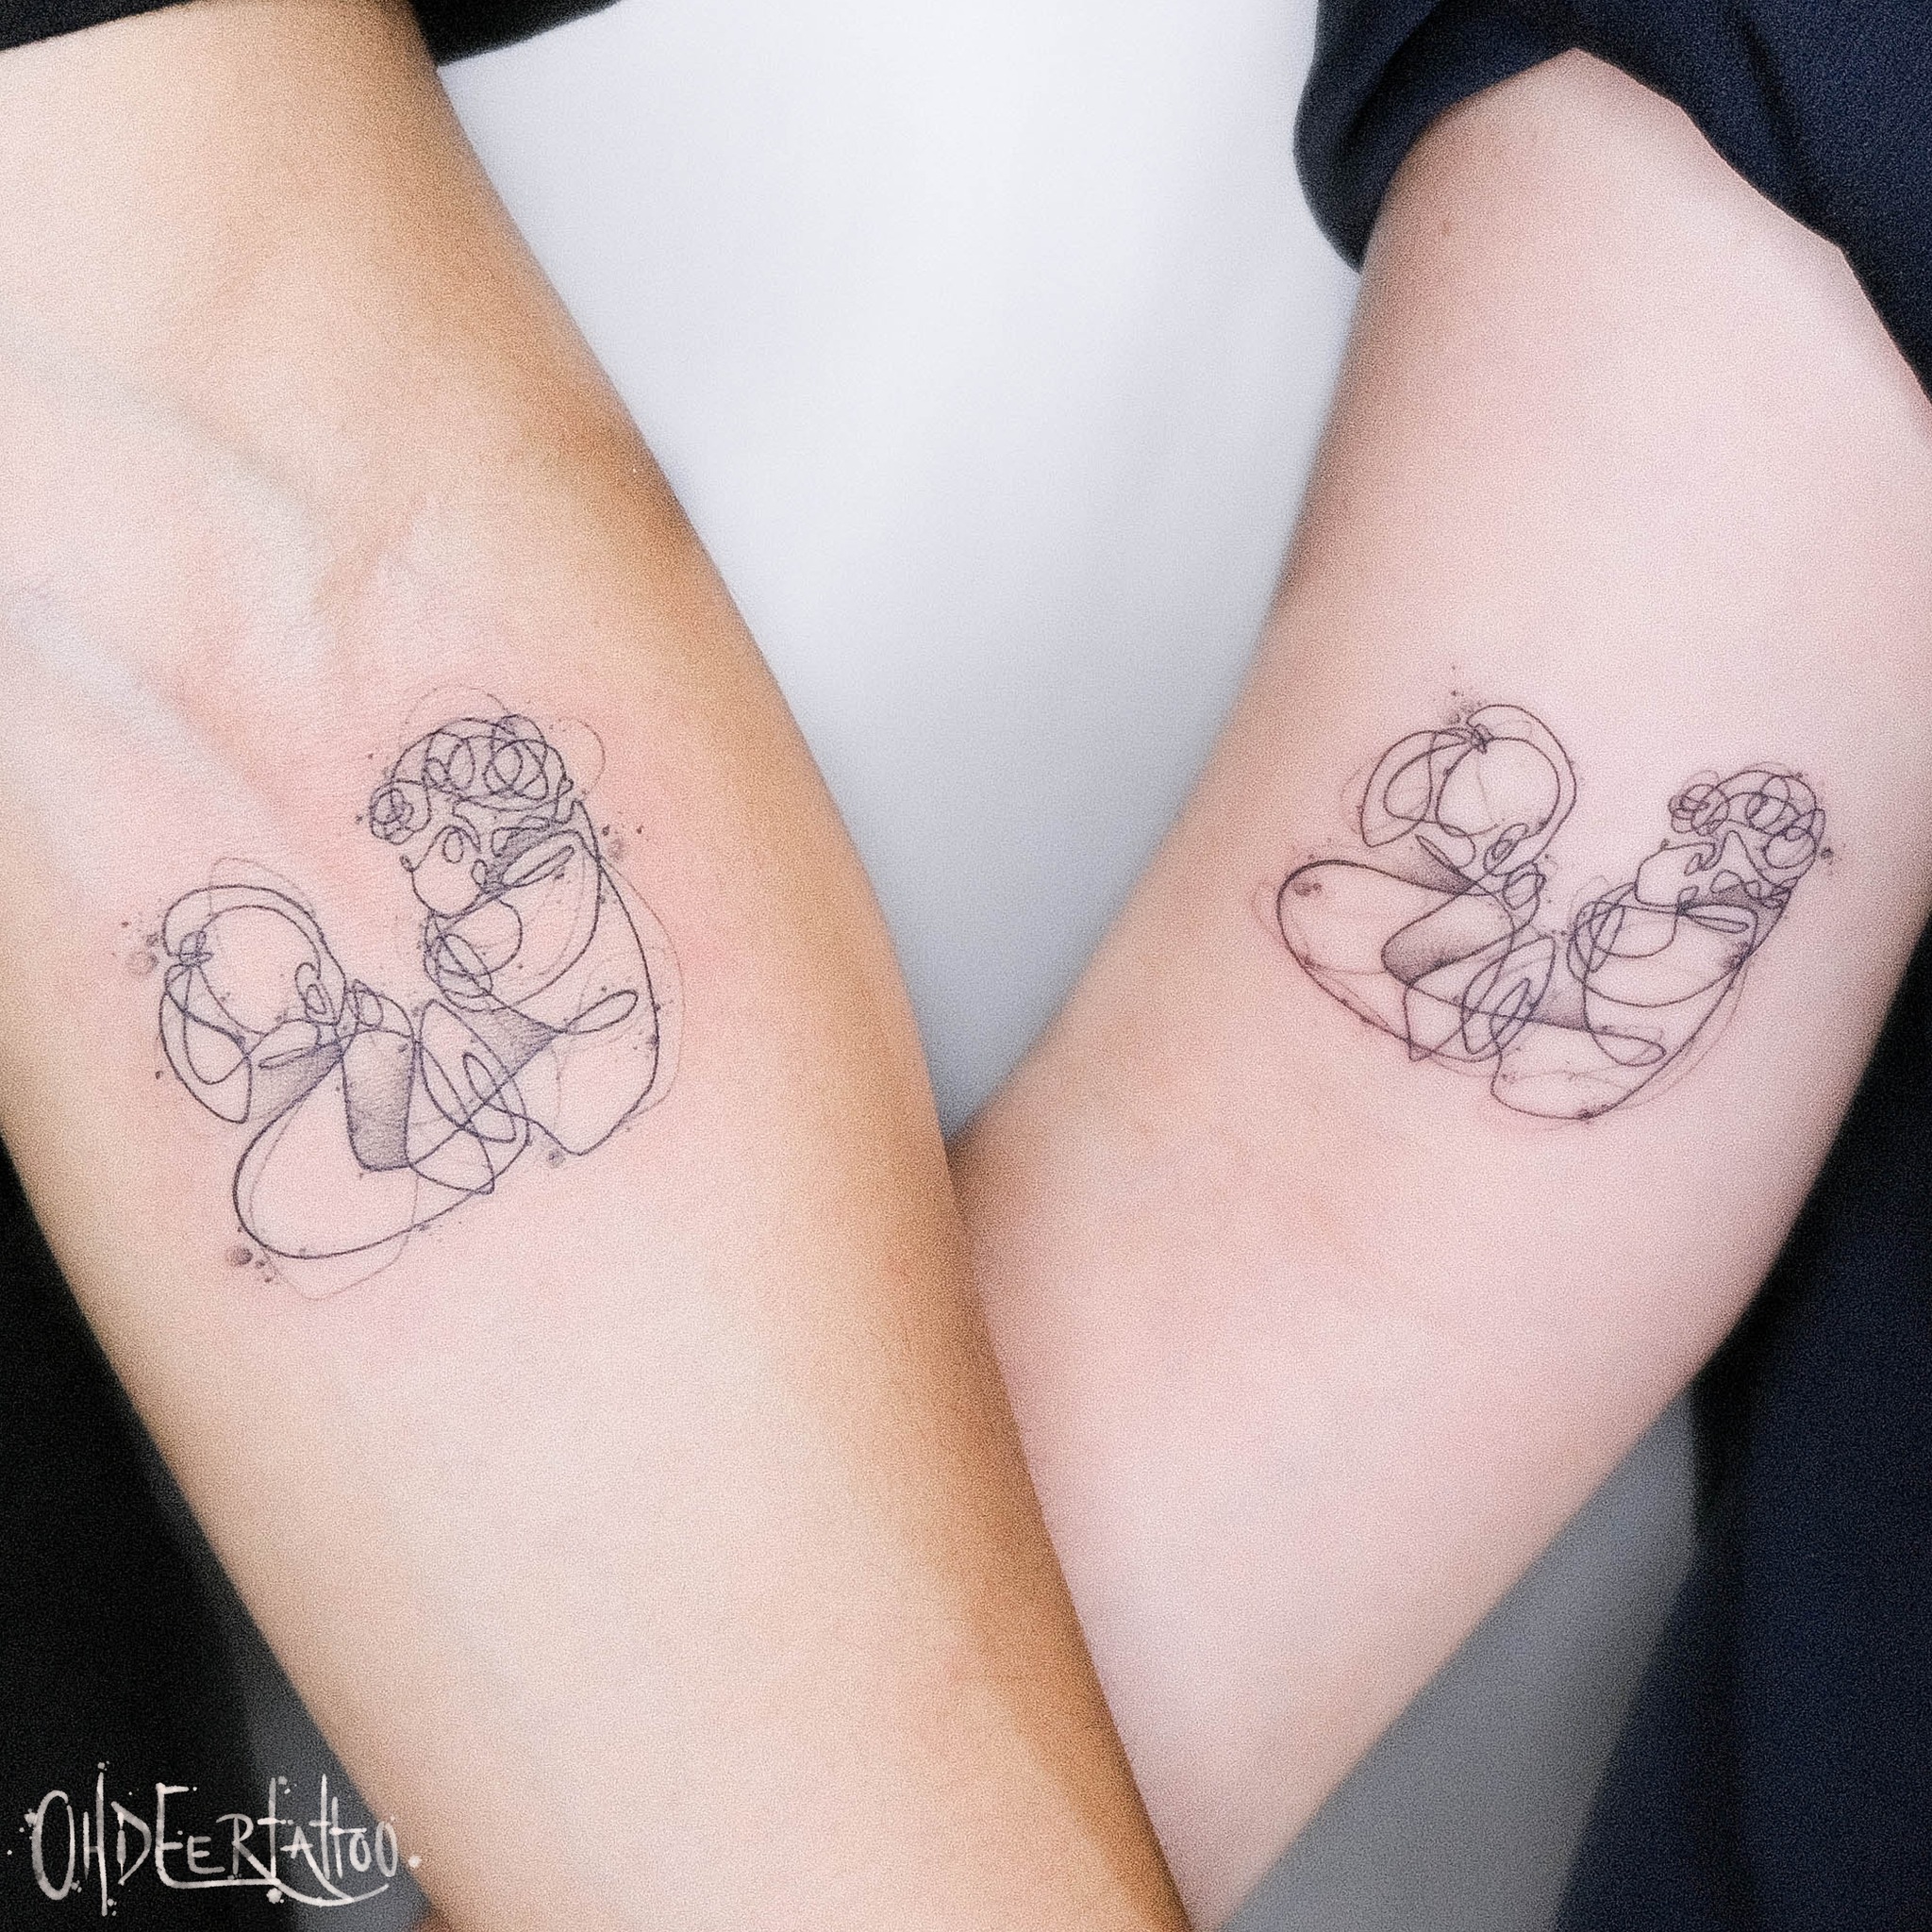 8 Tattoos For Couples If You're Serious About Forever | Preview.ph